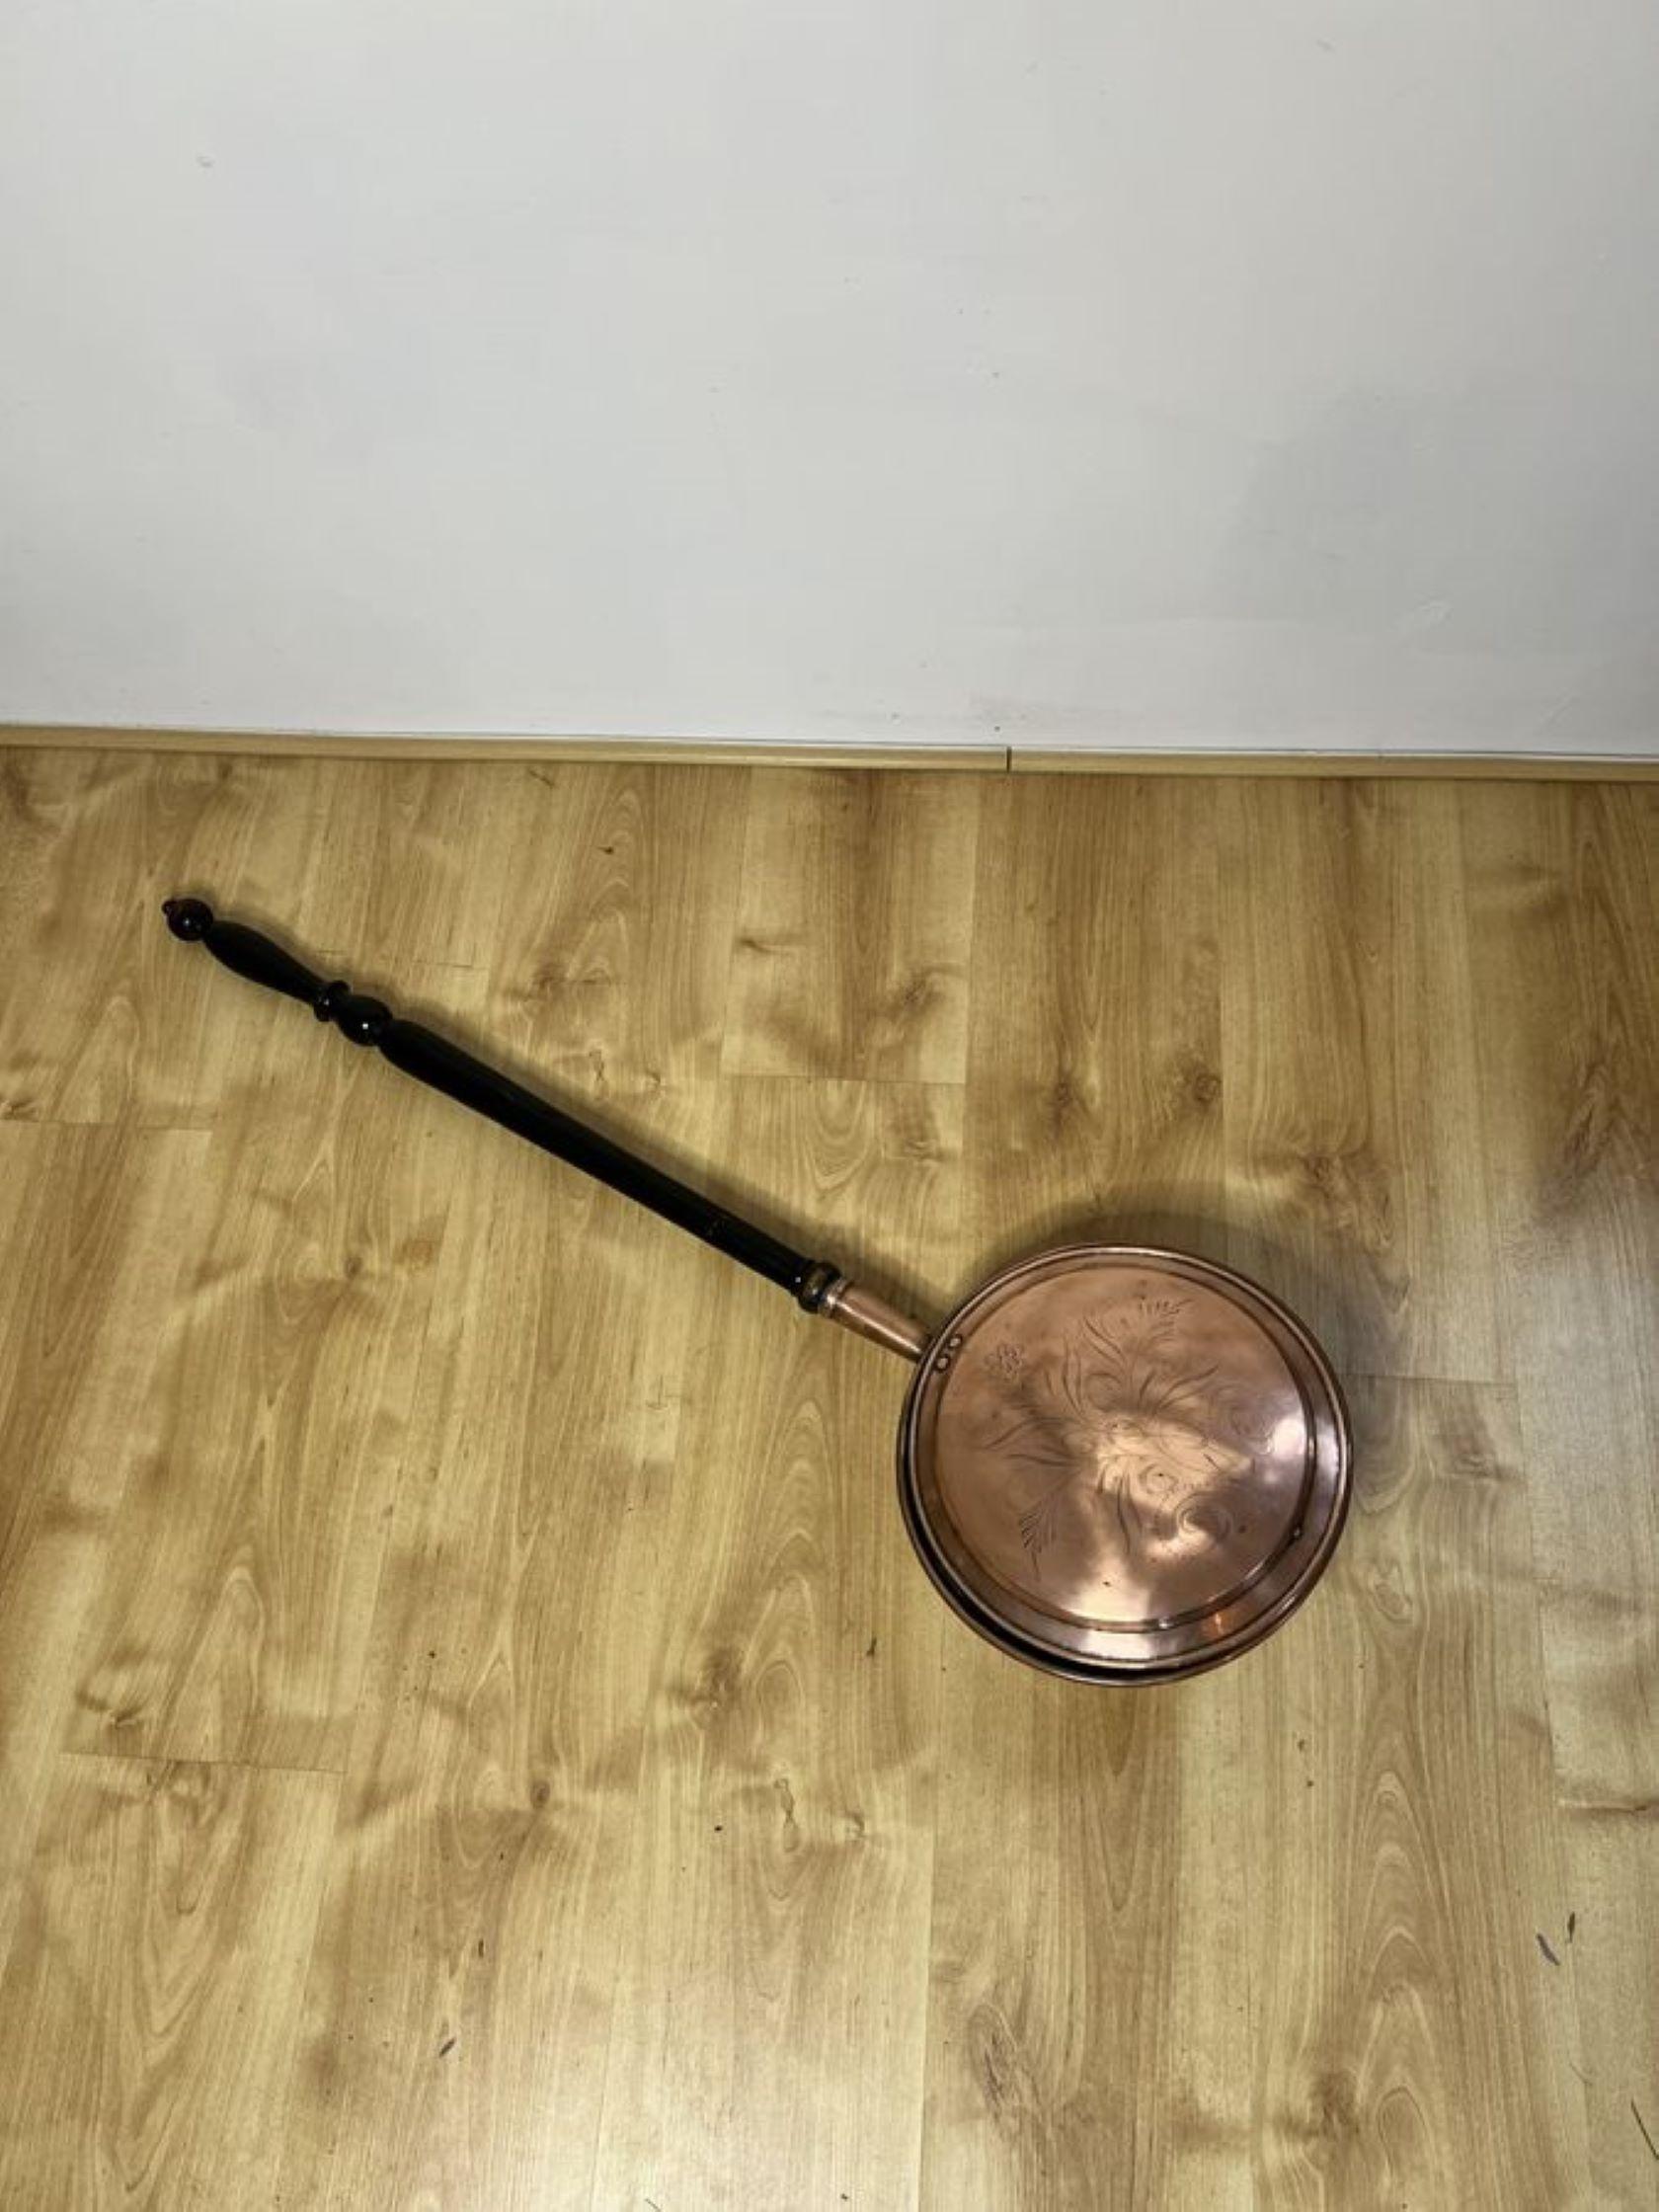 Stunning quality antique George III copper warming pan having the original handle and copper warming pan with engraving to the lid.

D. 1800